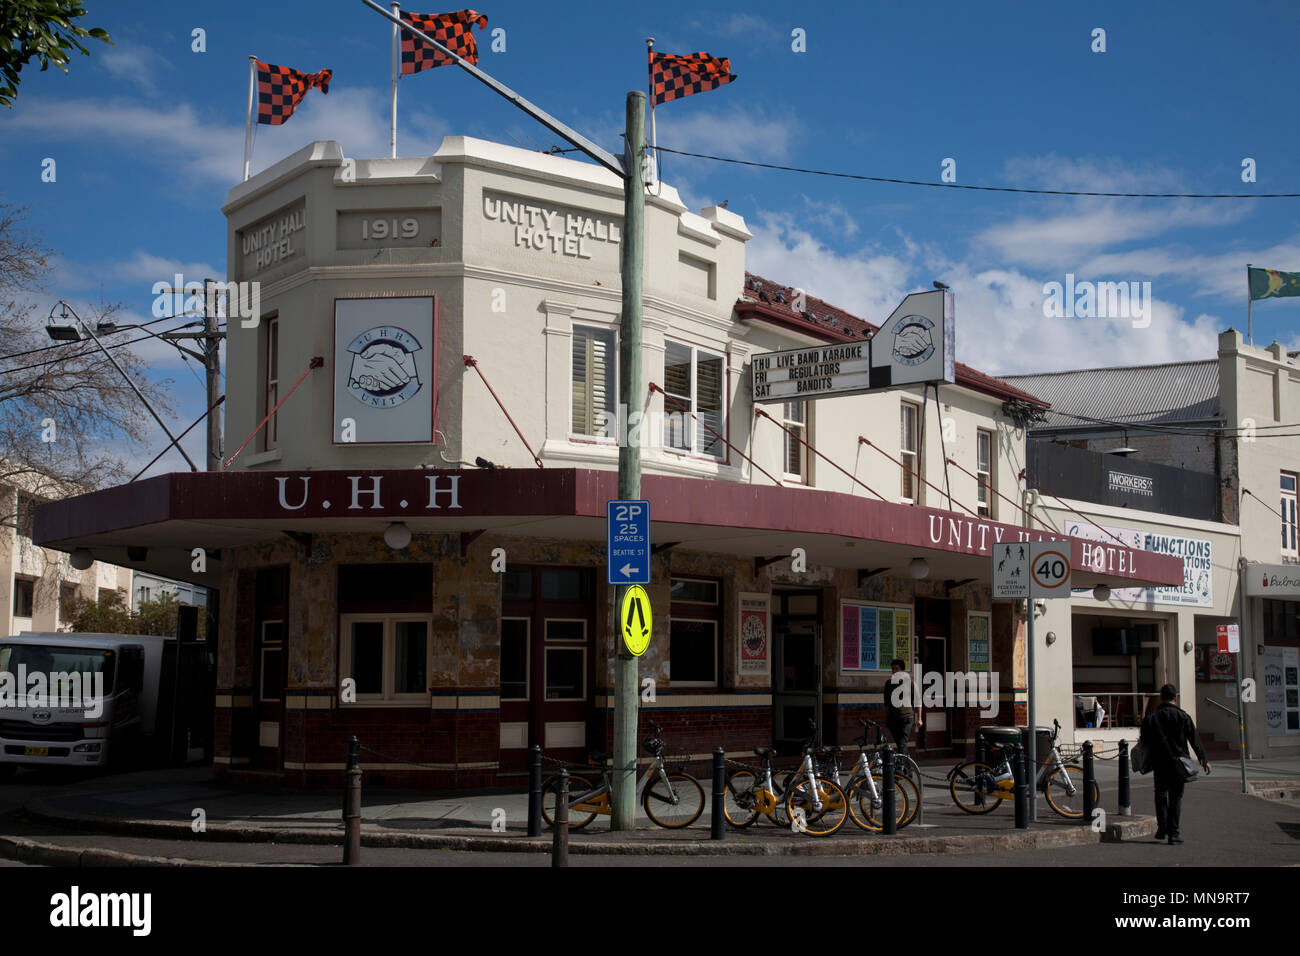 The Balmain Hotel High Resolution Stock Photography and Images - Alamy